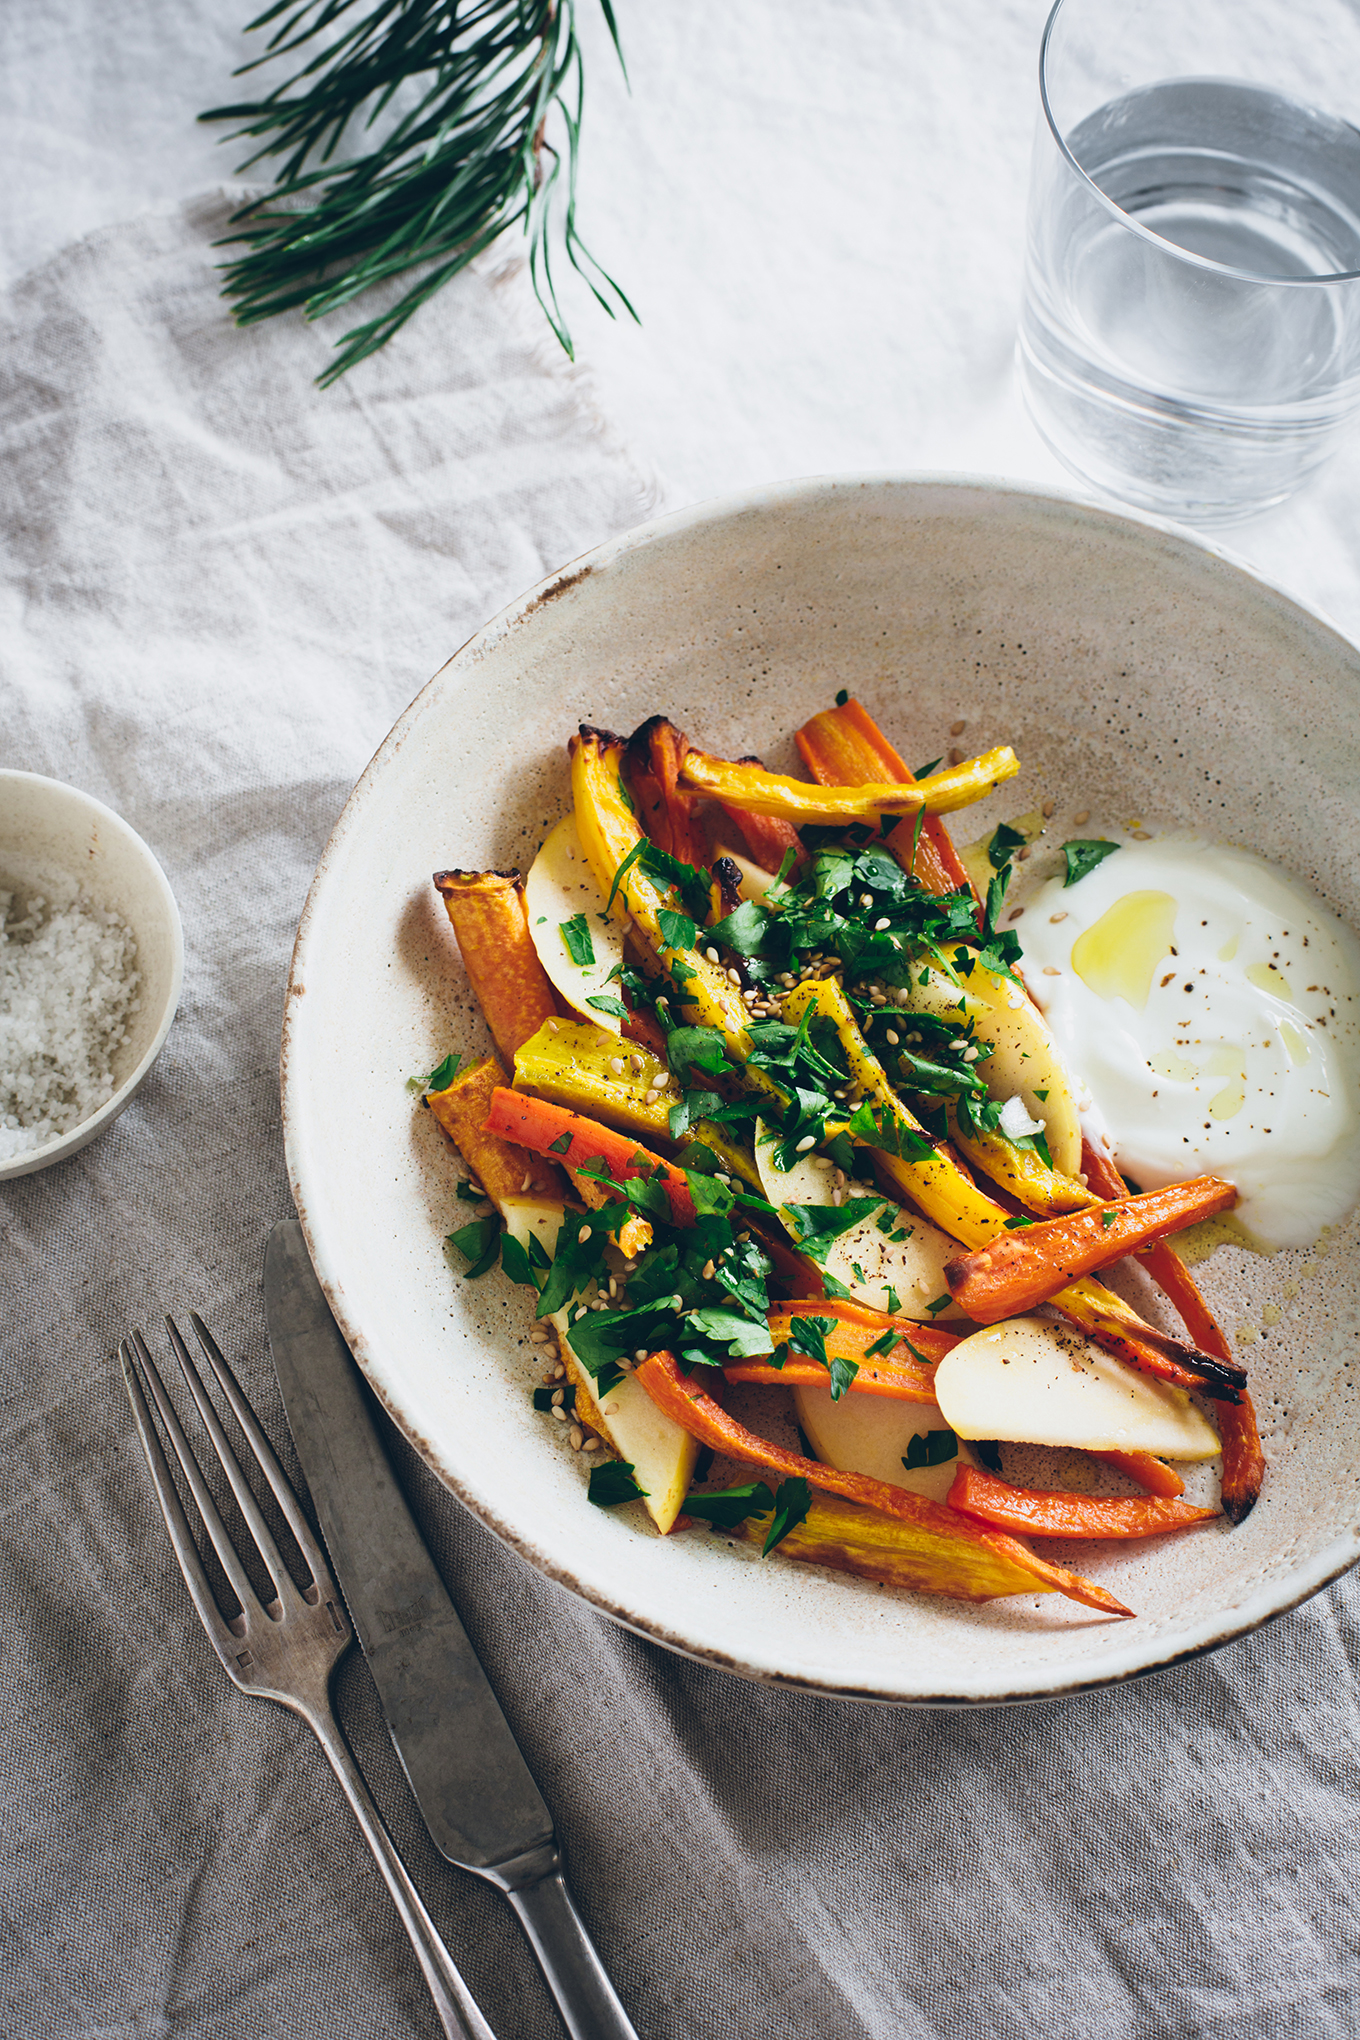 Apple and carrot salad - Carnets Parisiens